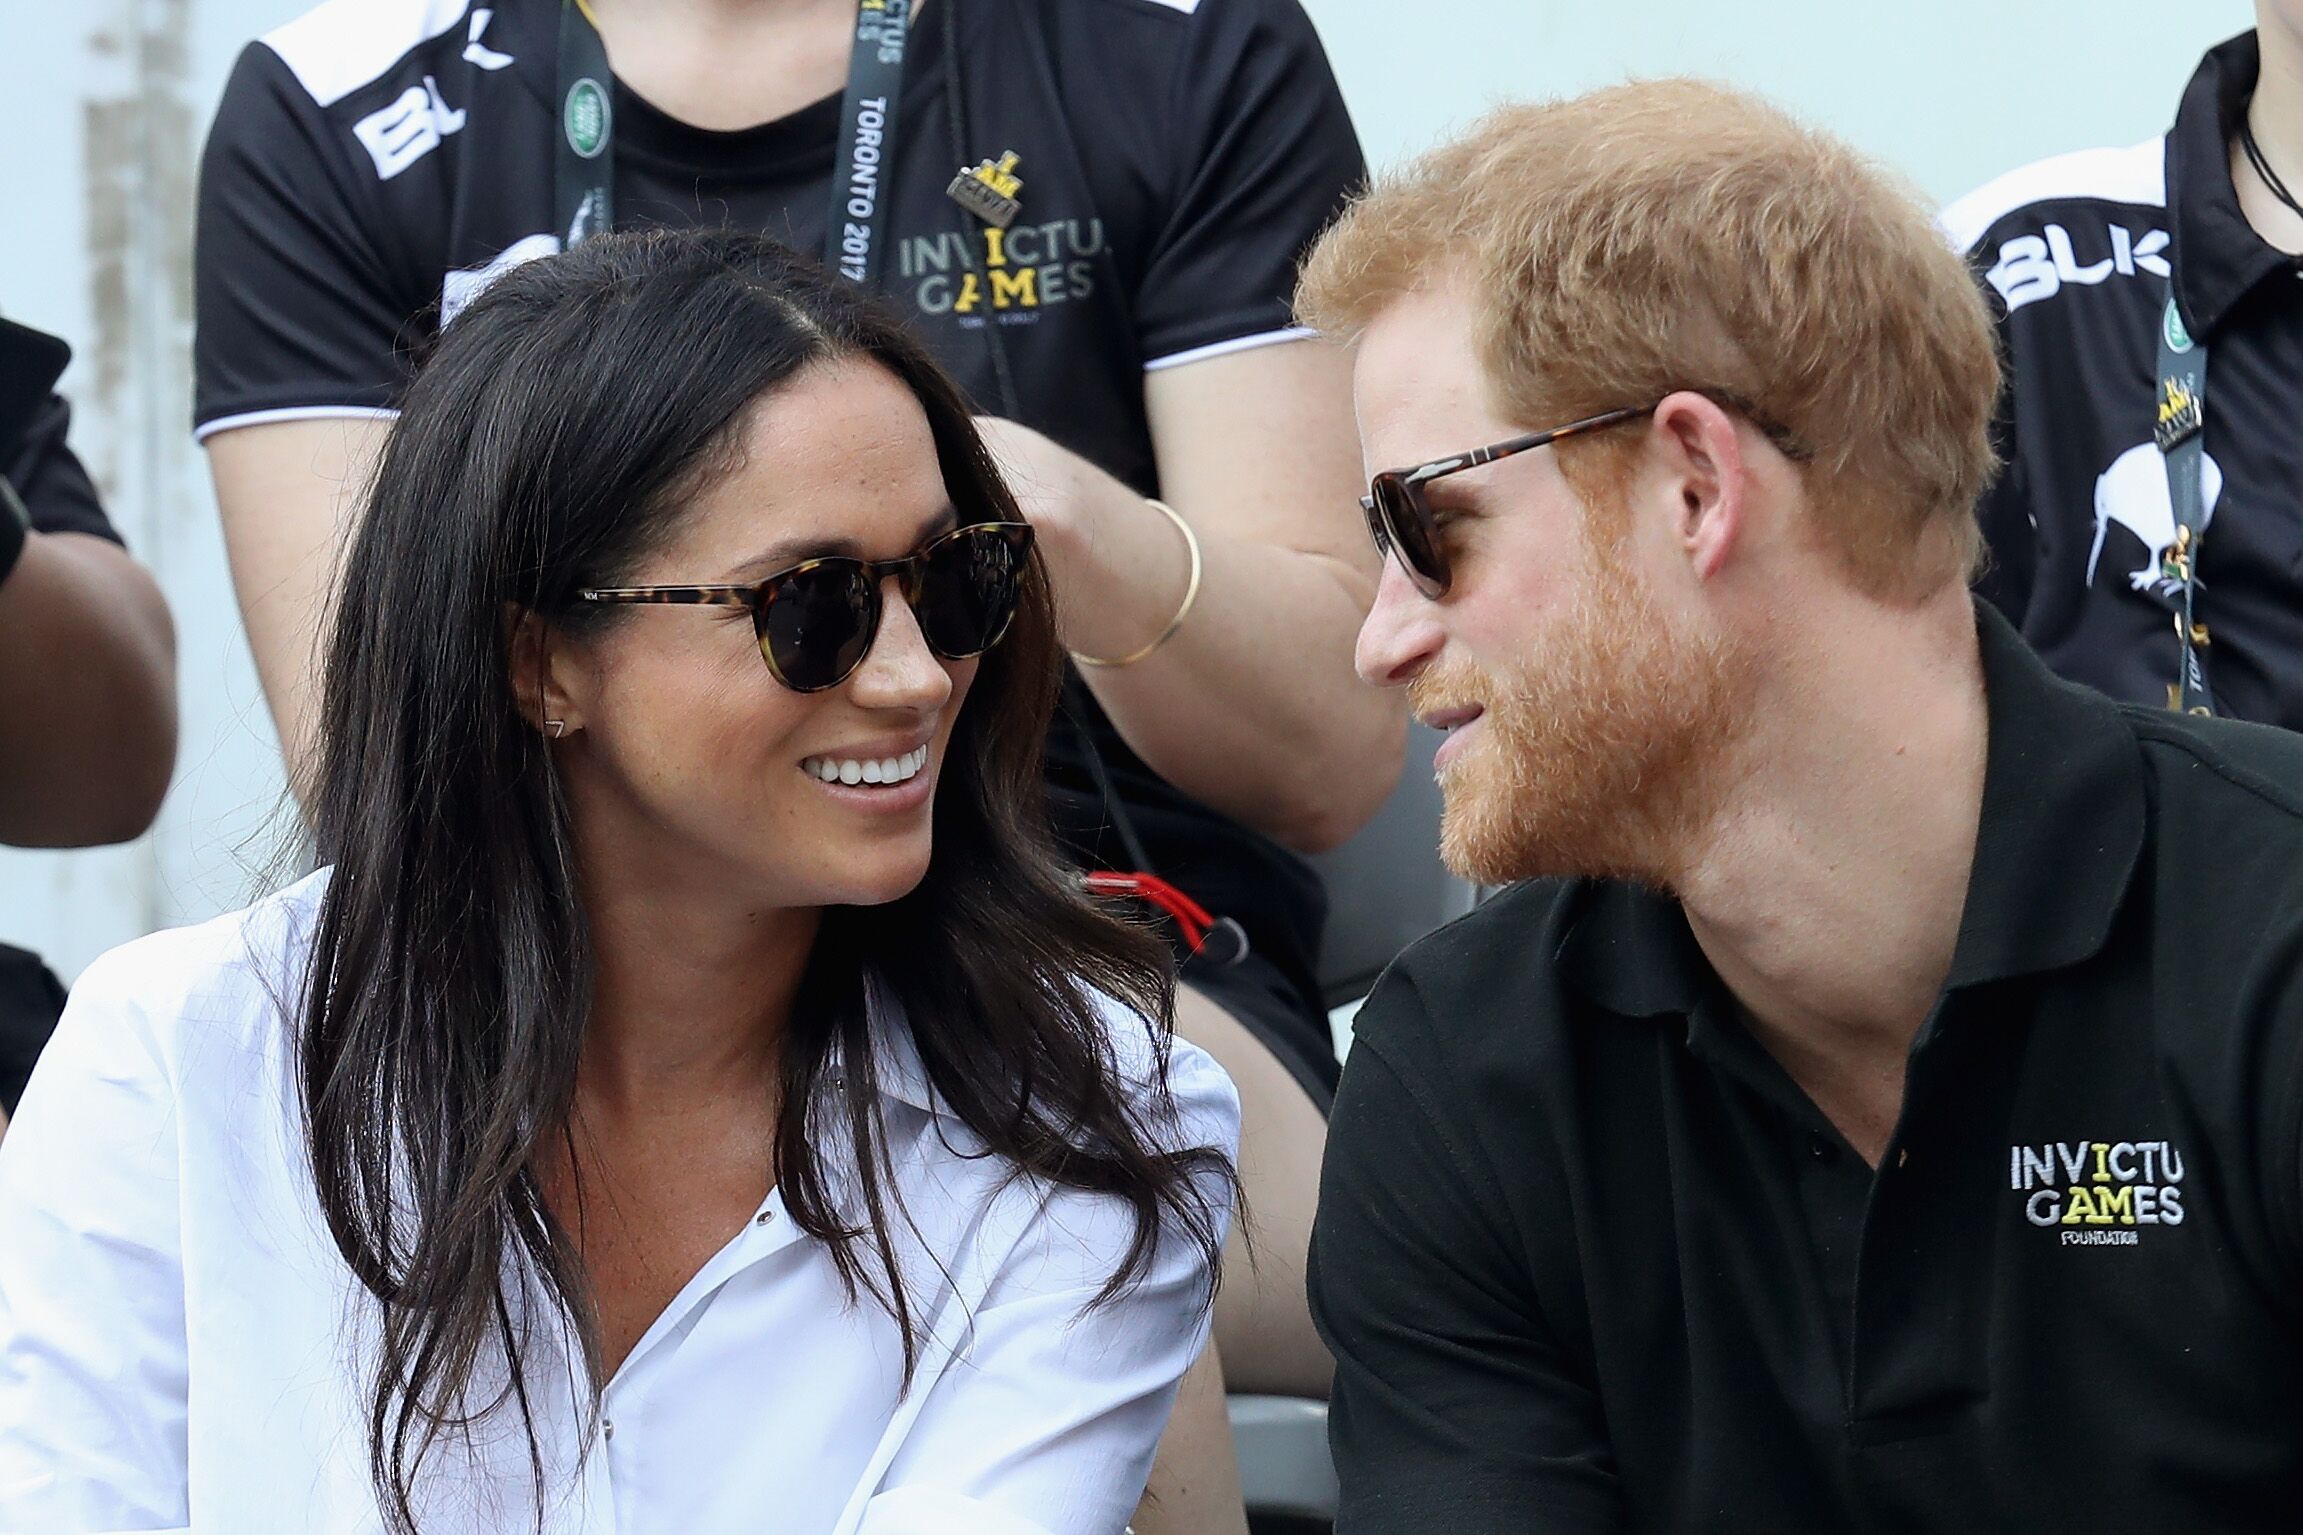 Prince Harry and Duchess Meghan at a Wheelchair Tennis match during the Invictus Games on September 25, 2017, in Toronto, Canada | Photo: Chris Jackson/Getty Images